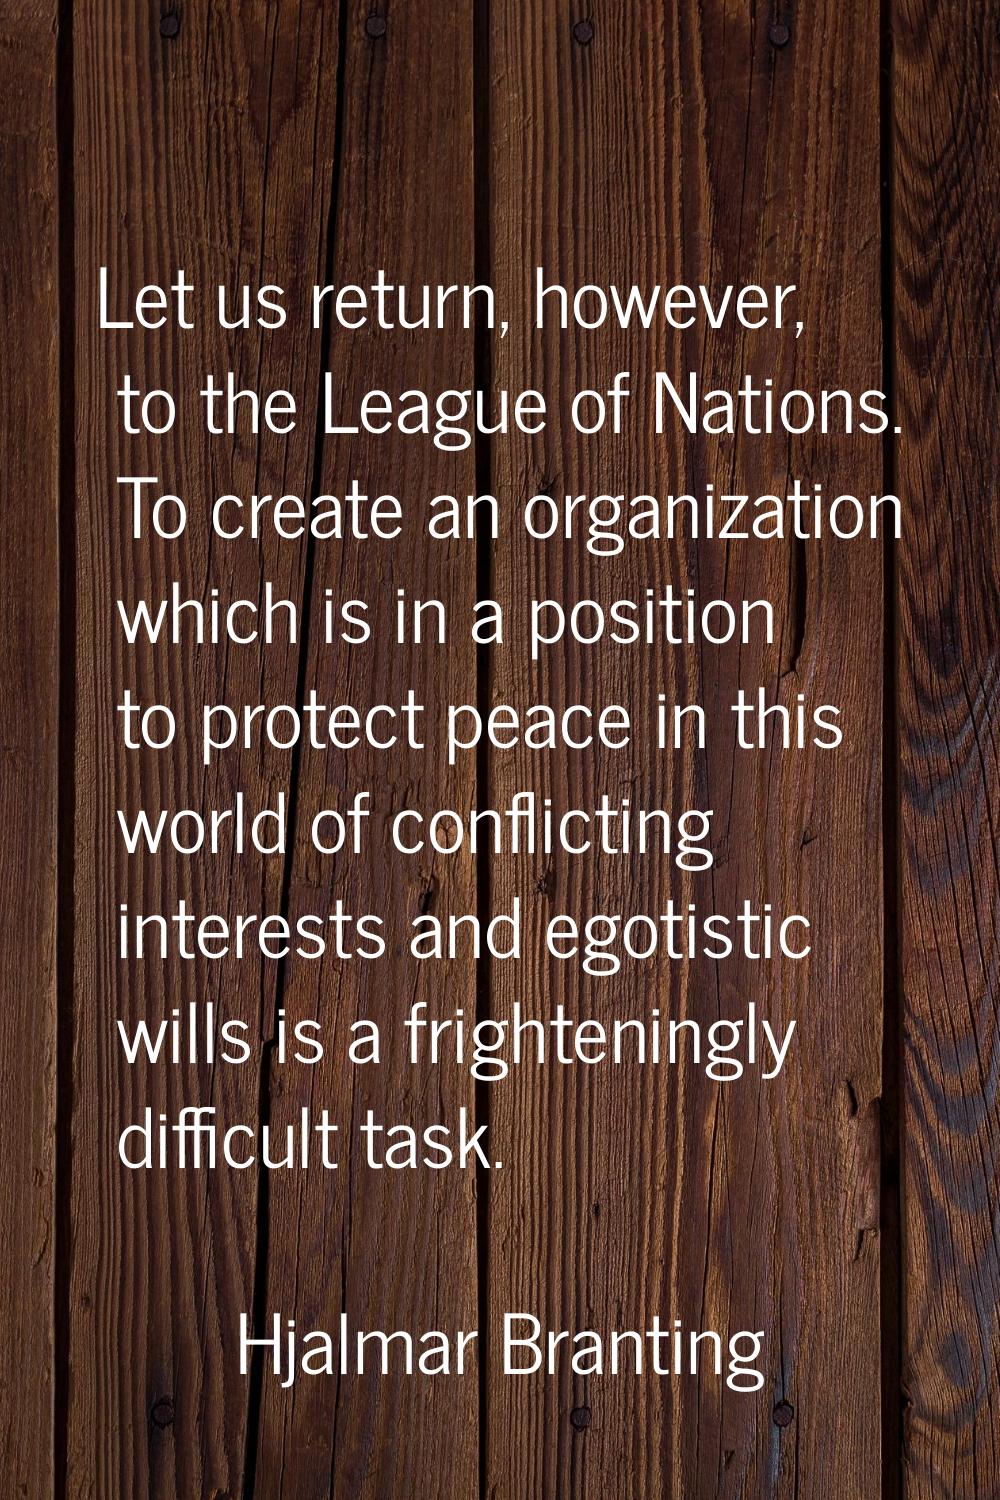 Let us return, however, to the League of Nations. To create an organization which is in a position 